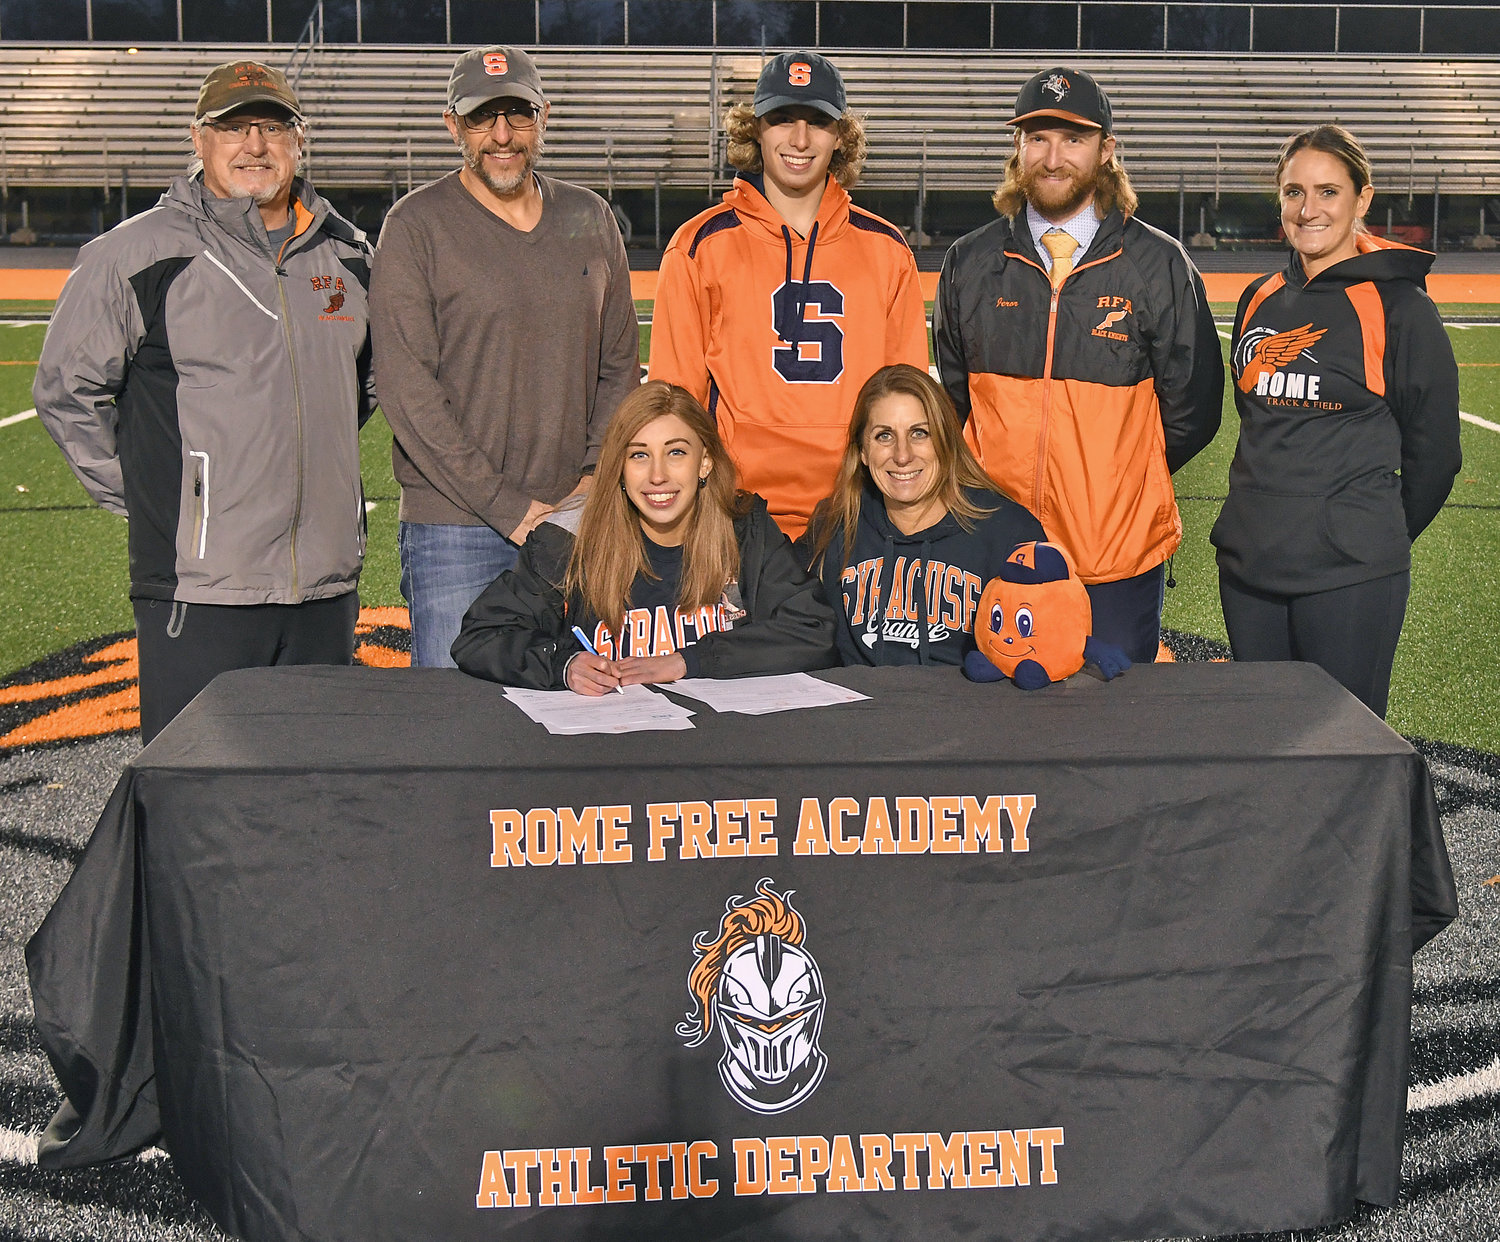 HEADED TO SYRACUSE — Emily Toth-Ratazzi signs her letter of intent to run cross country at Division I Syracuse University next year. The Rome Free Academy senior is joined by her mother, Shirley Toth. Standing with them are, from left: coach Brett Couchman, her father Paul Ratazzi, her brother Nicholas Toth-Ratazzi, coach Nick Jeror and coach Diane Benedict-Stevenson.